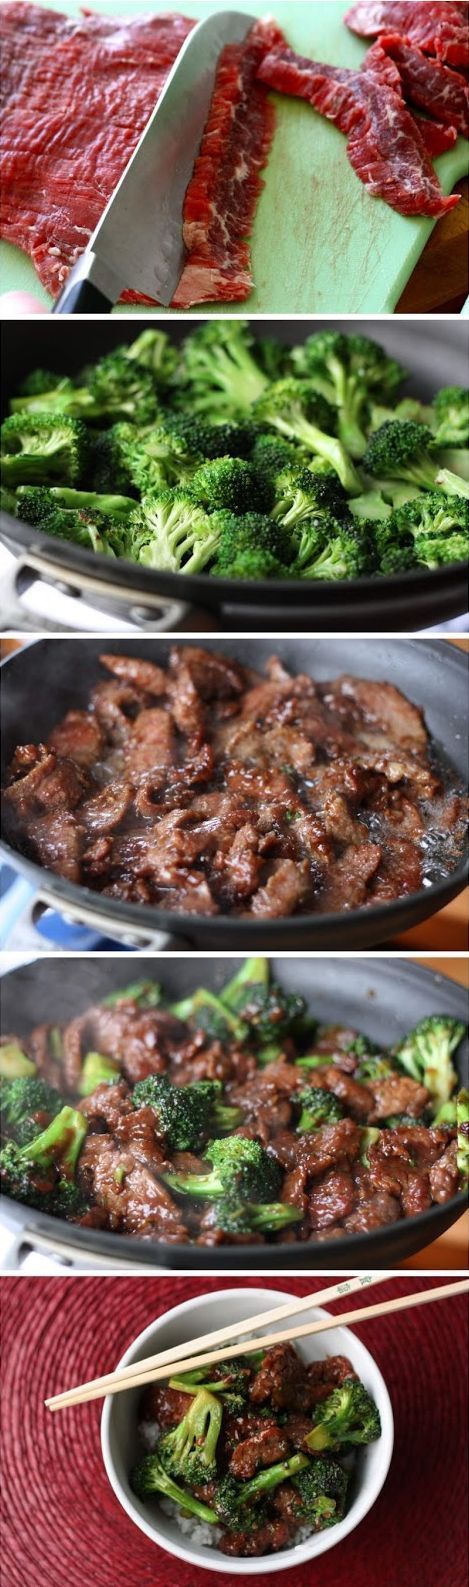 Beef with Broccoli: Easy marinade is all that it takes to get that crazy-tender beef, even with less expensive cuts.